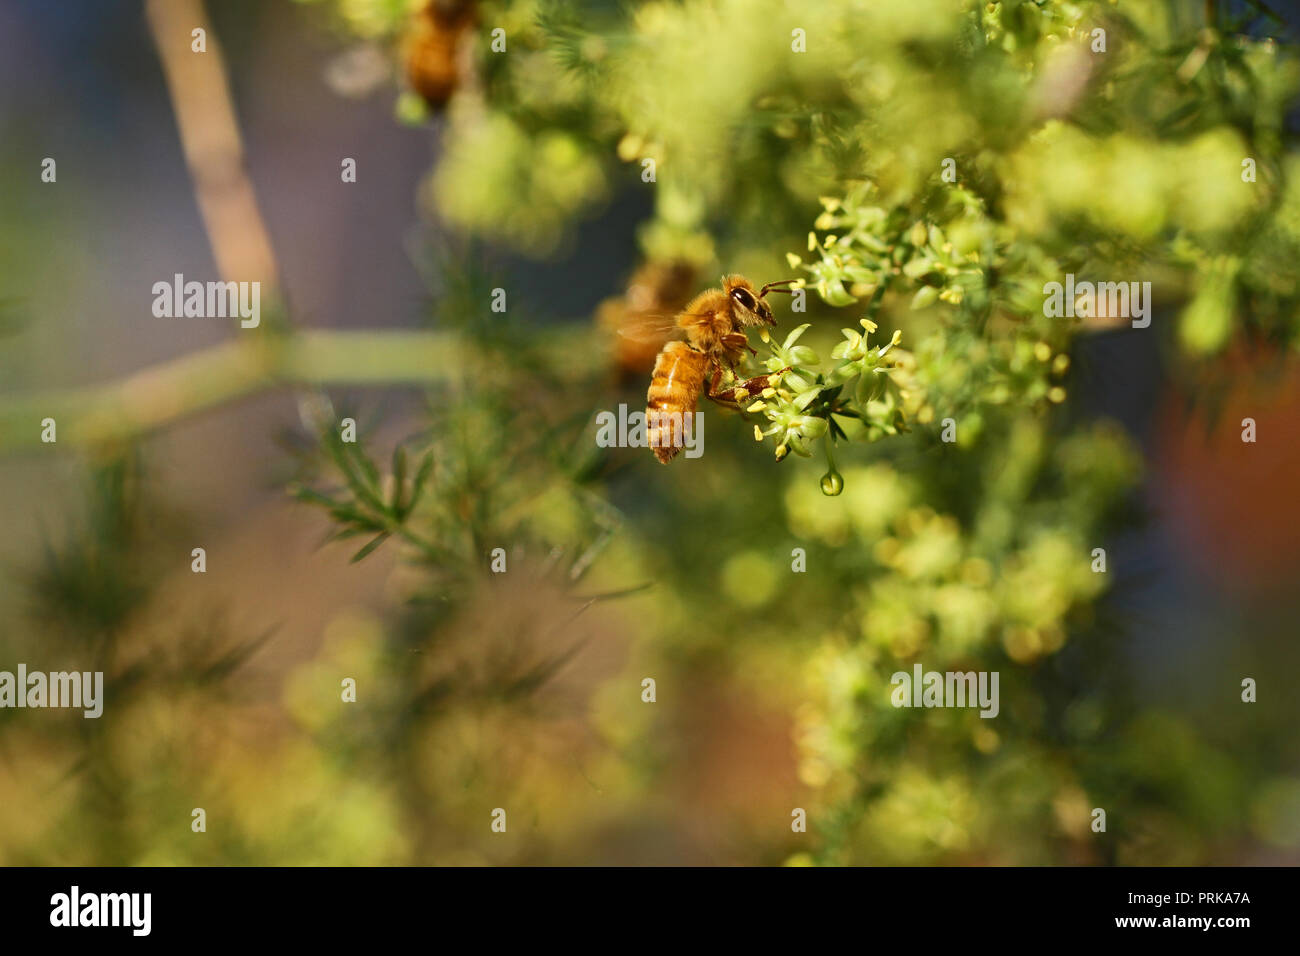 honey bee or worker bee Latin apis mellifera pollinating wild asparagus or sparrow grass Latin asparagus acutifolius in Italy in late summer Stock Photo